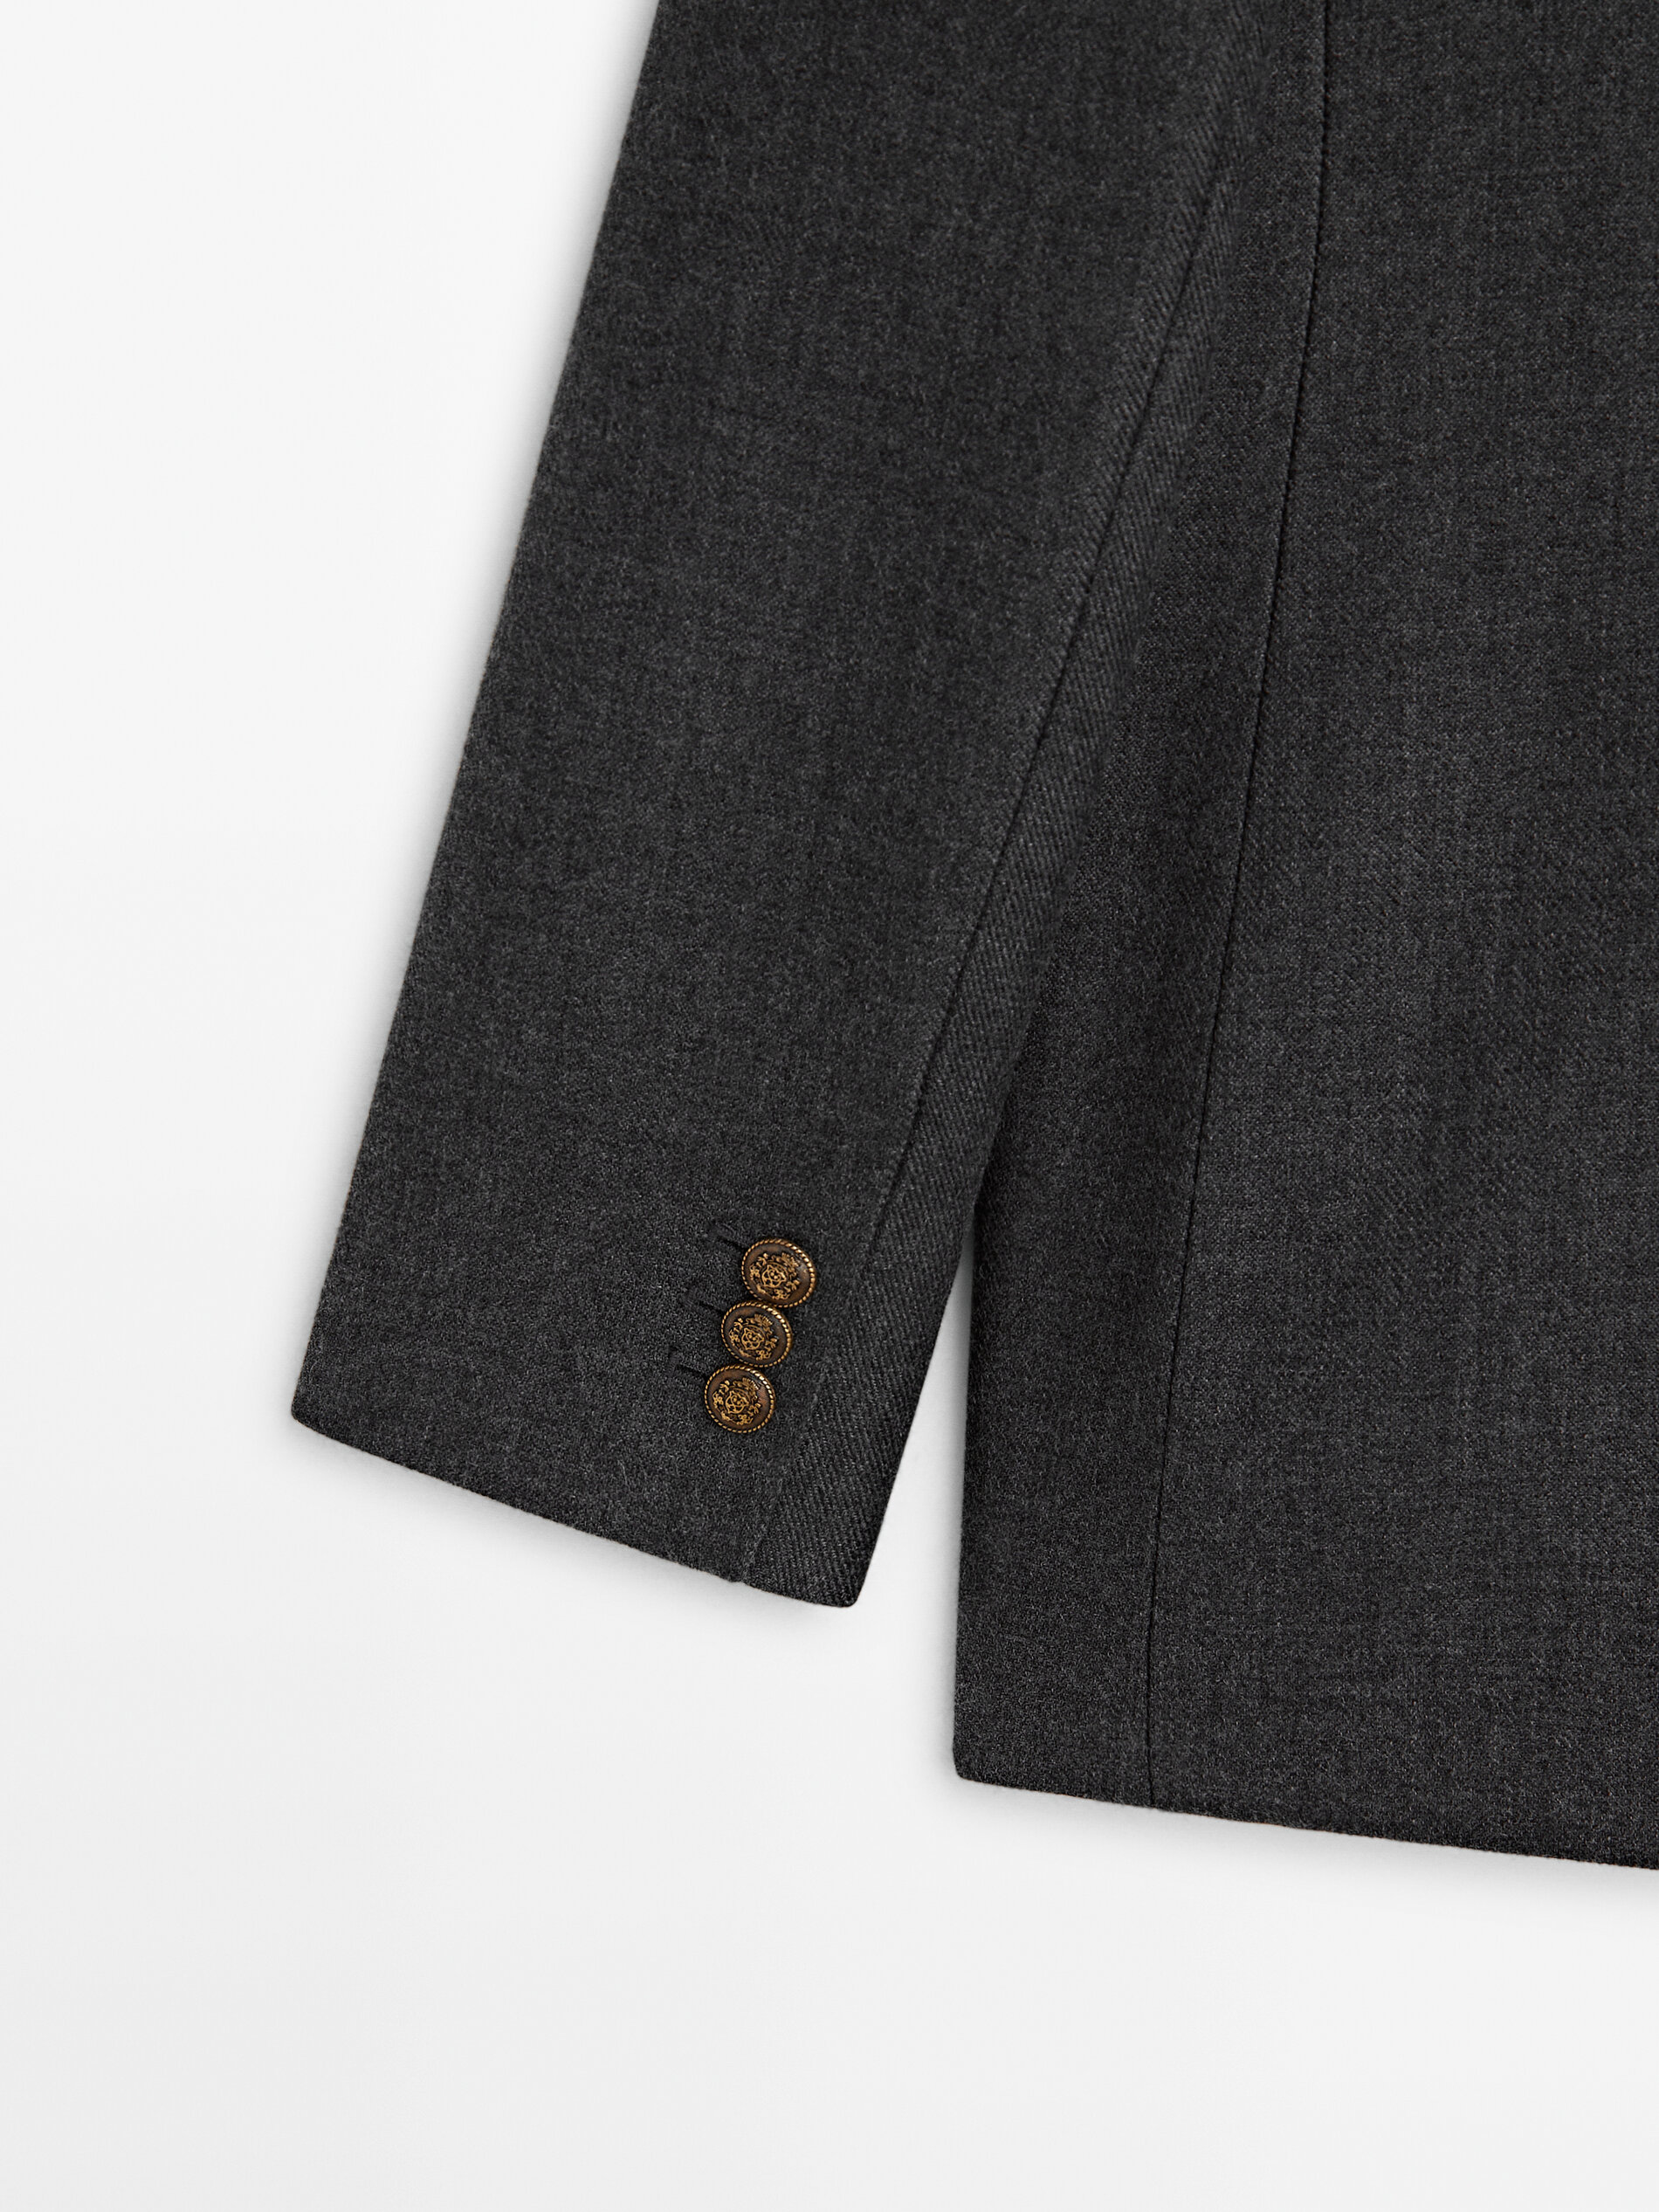 Twill blazer with buttons